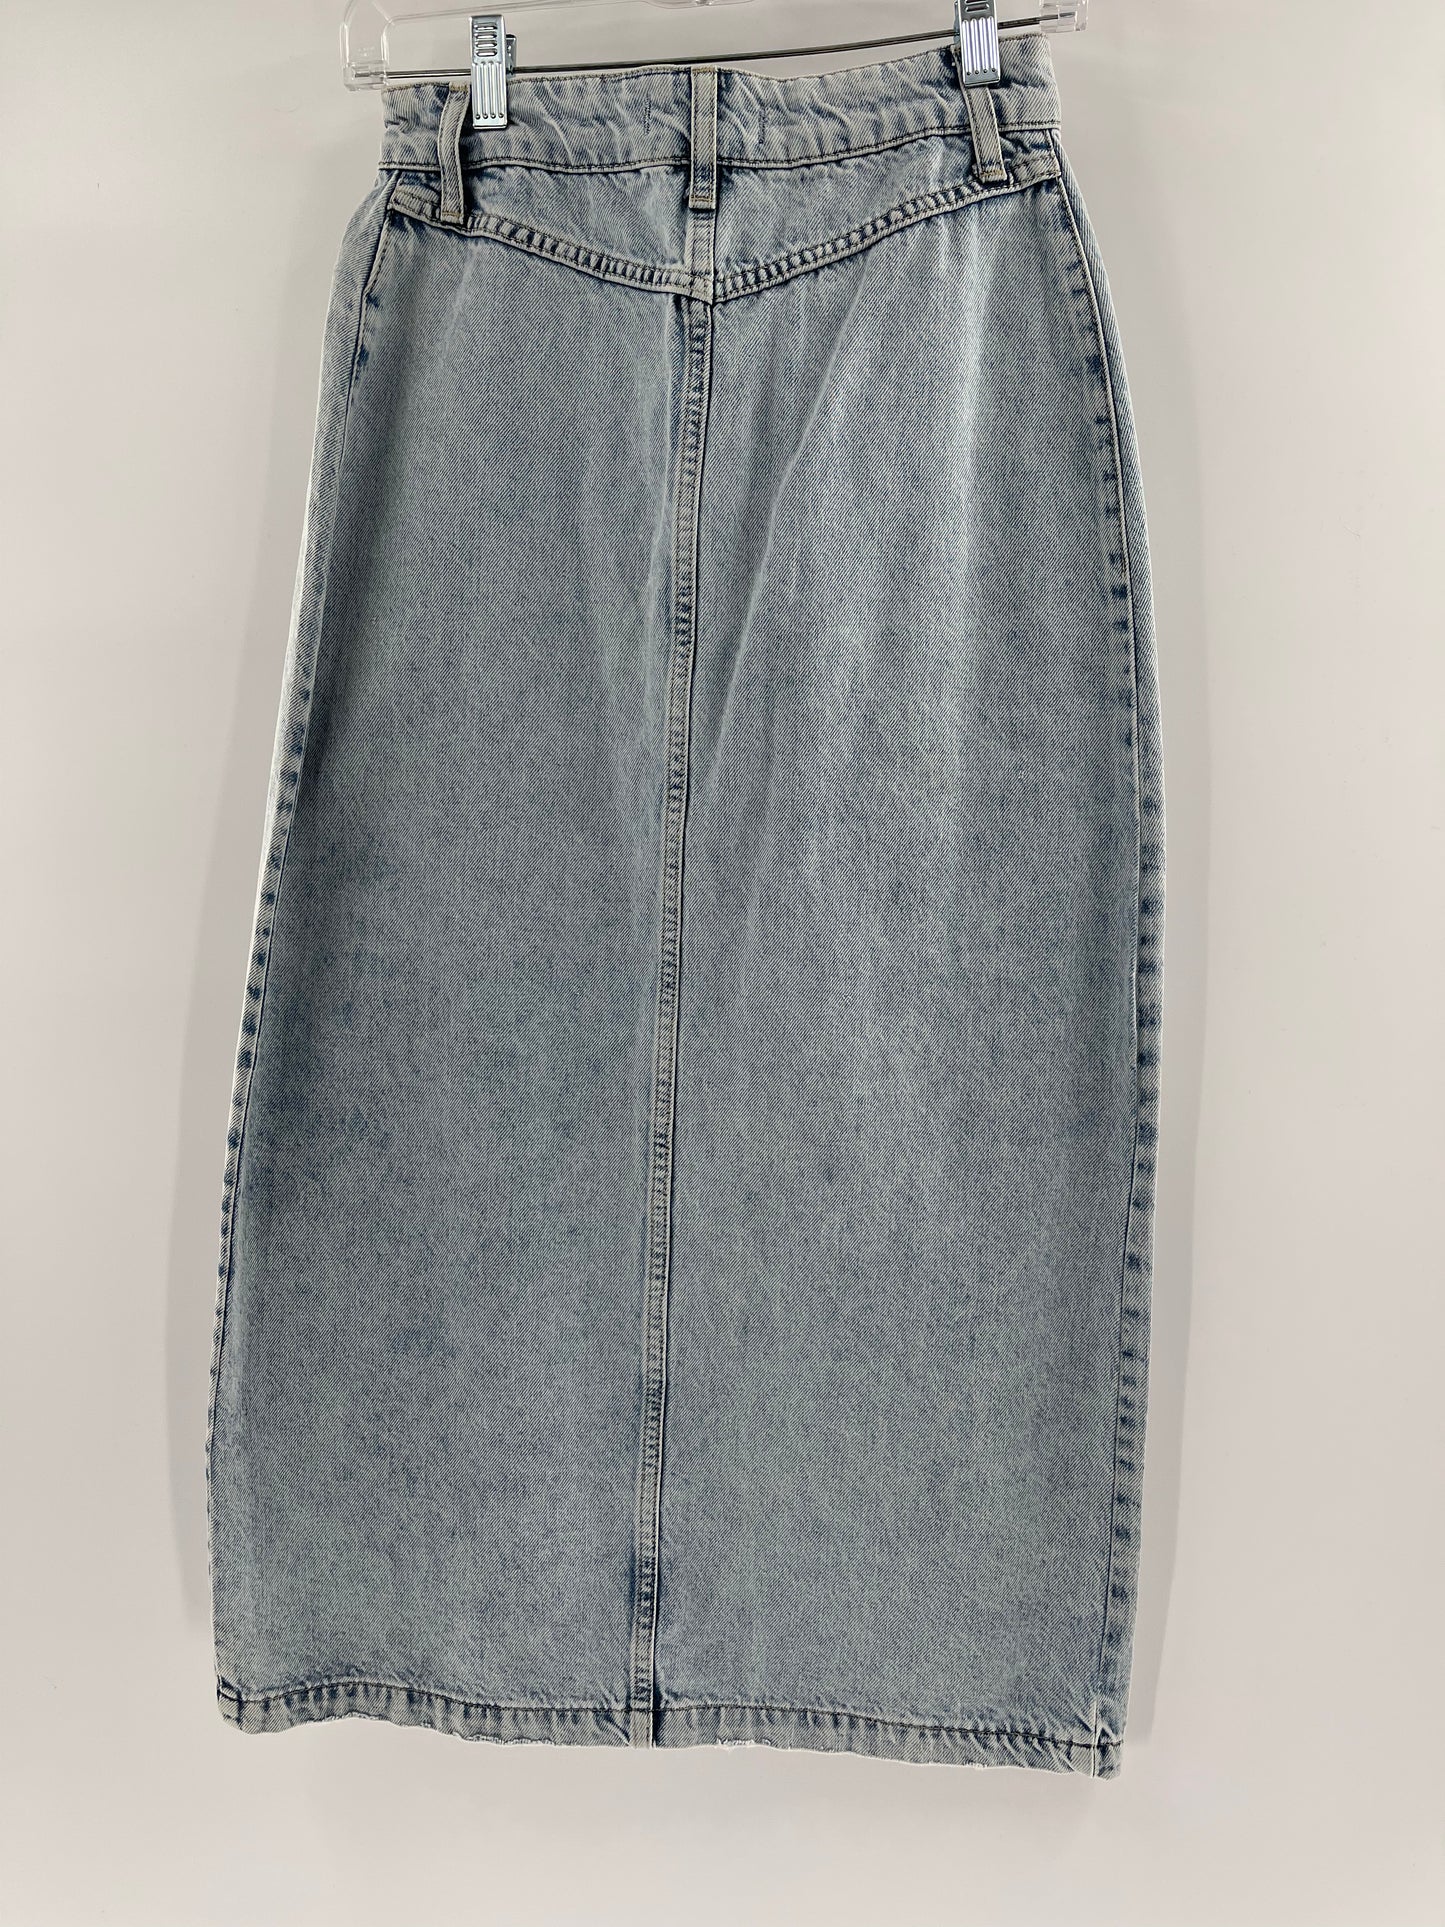 Free People - We The Free - Light Wash Denim Button front skirt with oversized pockets (Size 0)